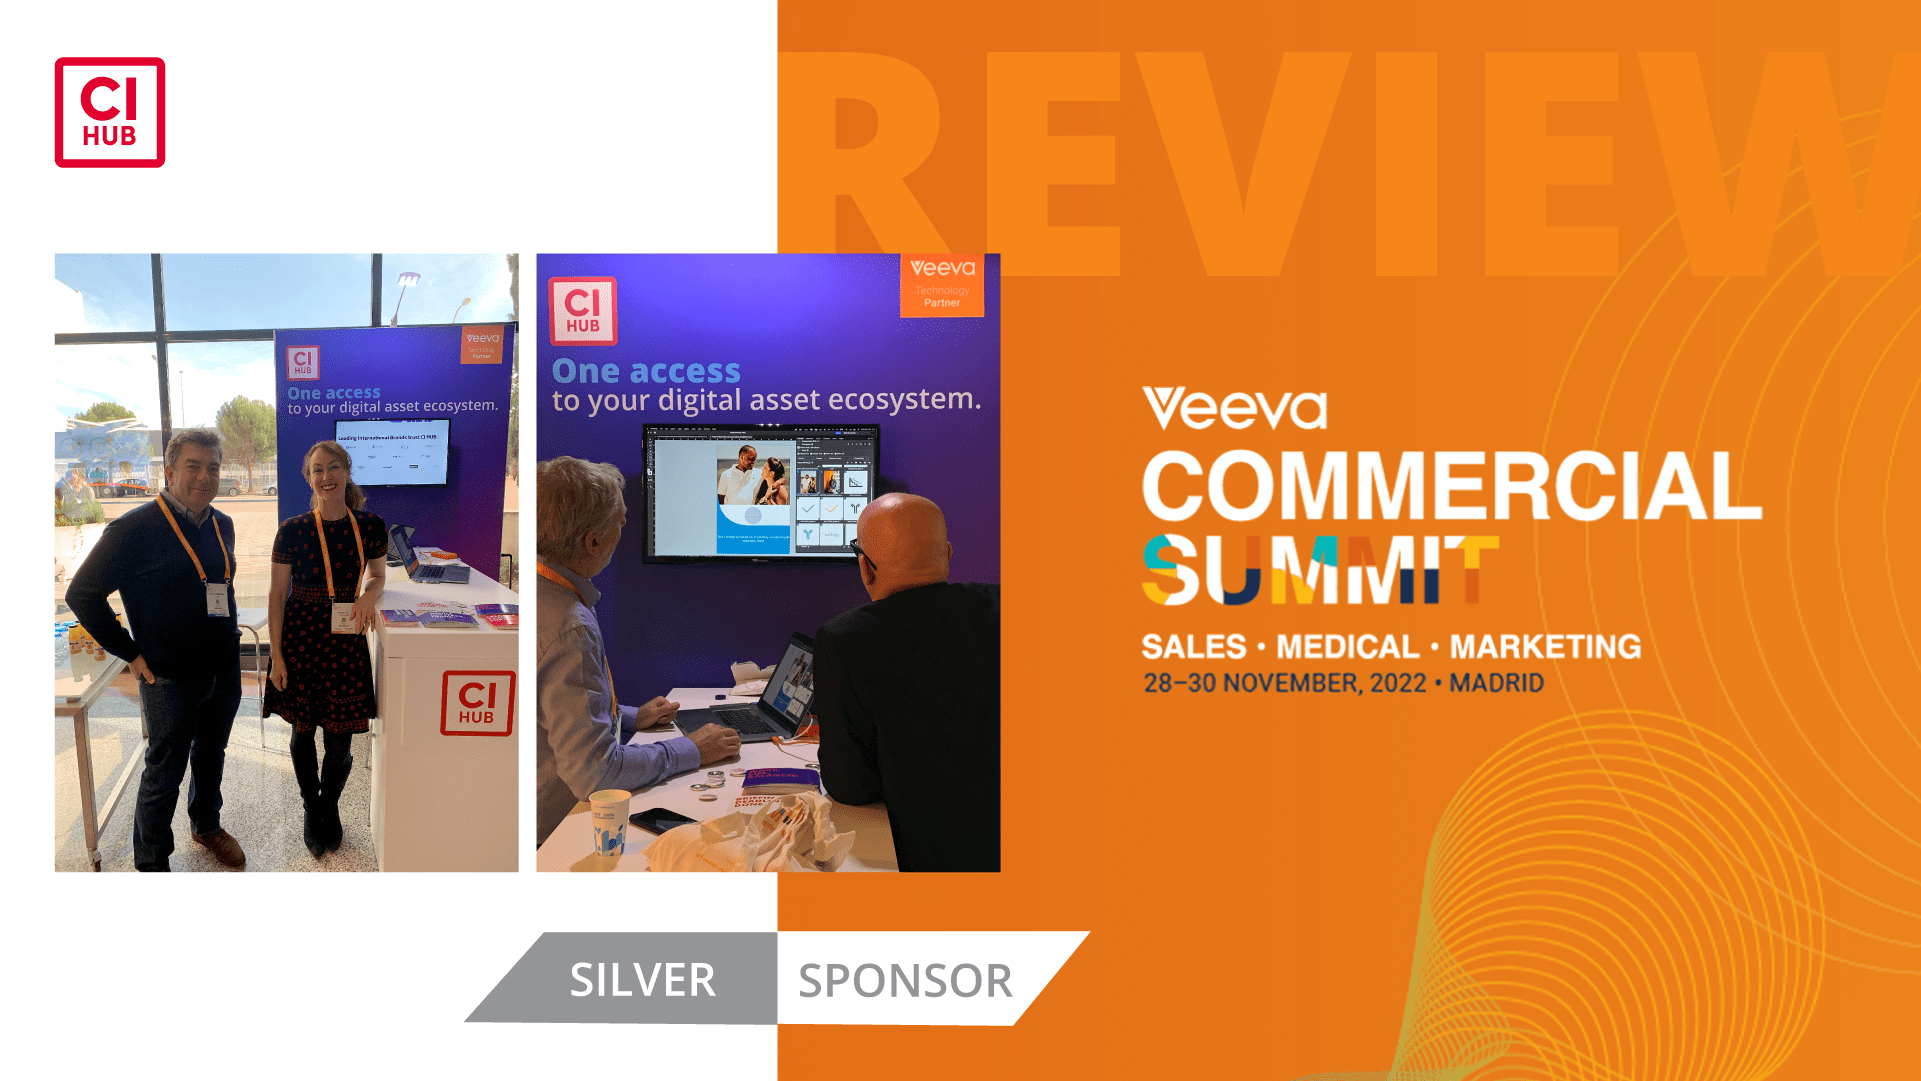 CI HUB joined Veeva Commercial Summit EU in...